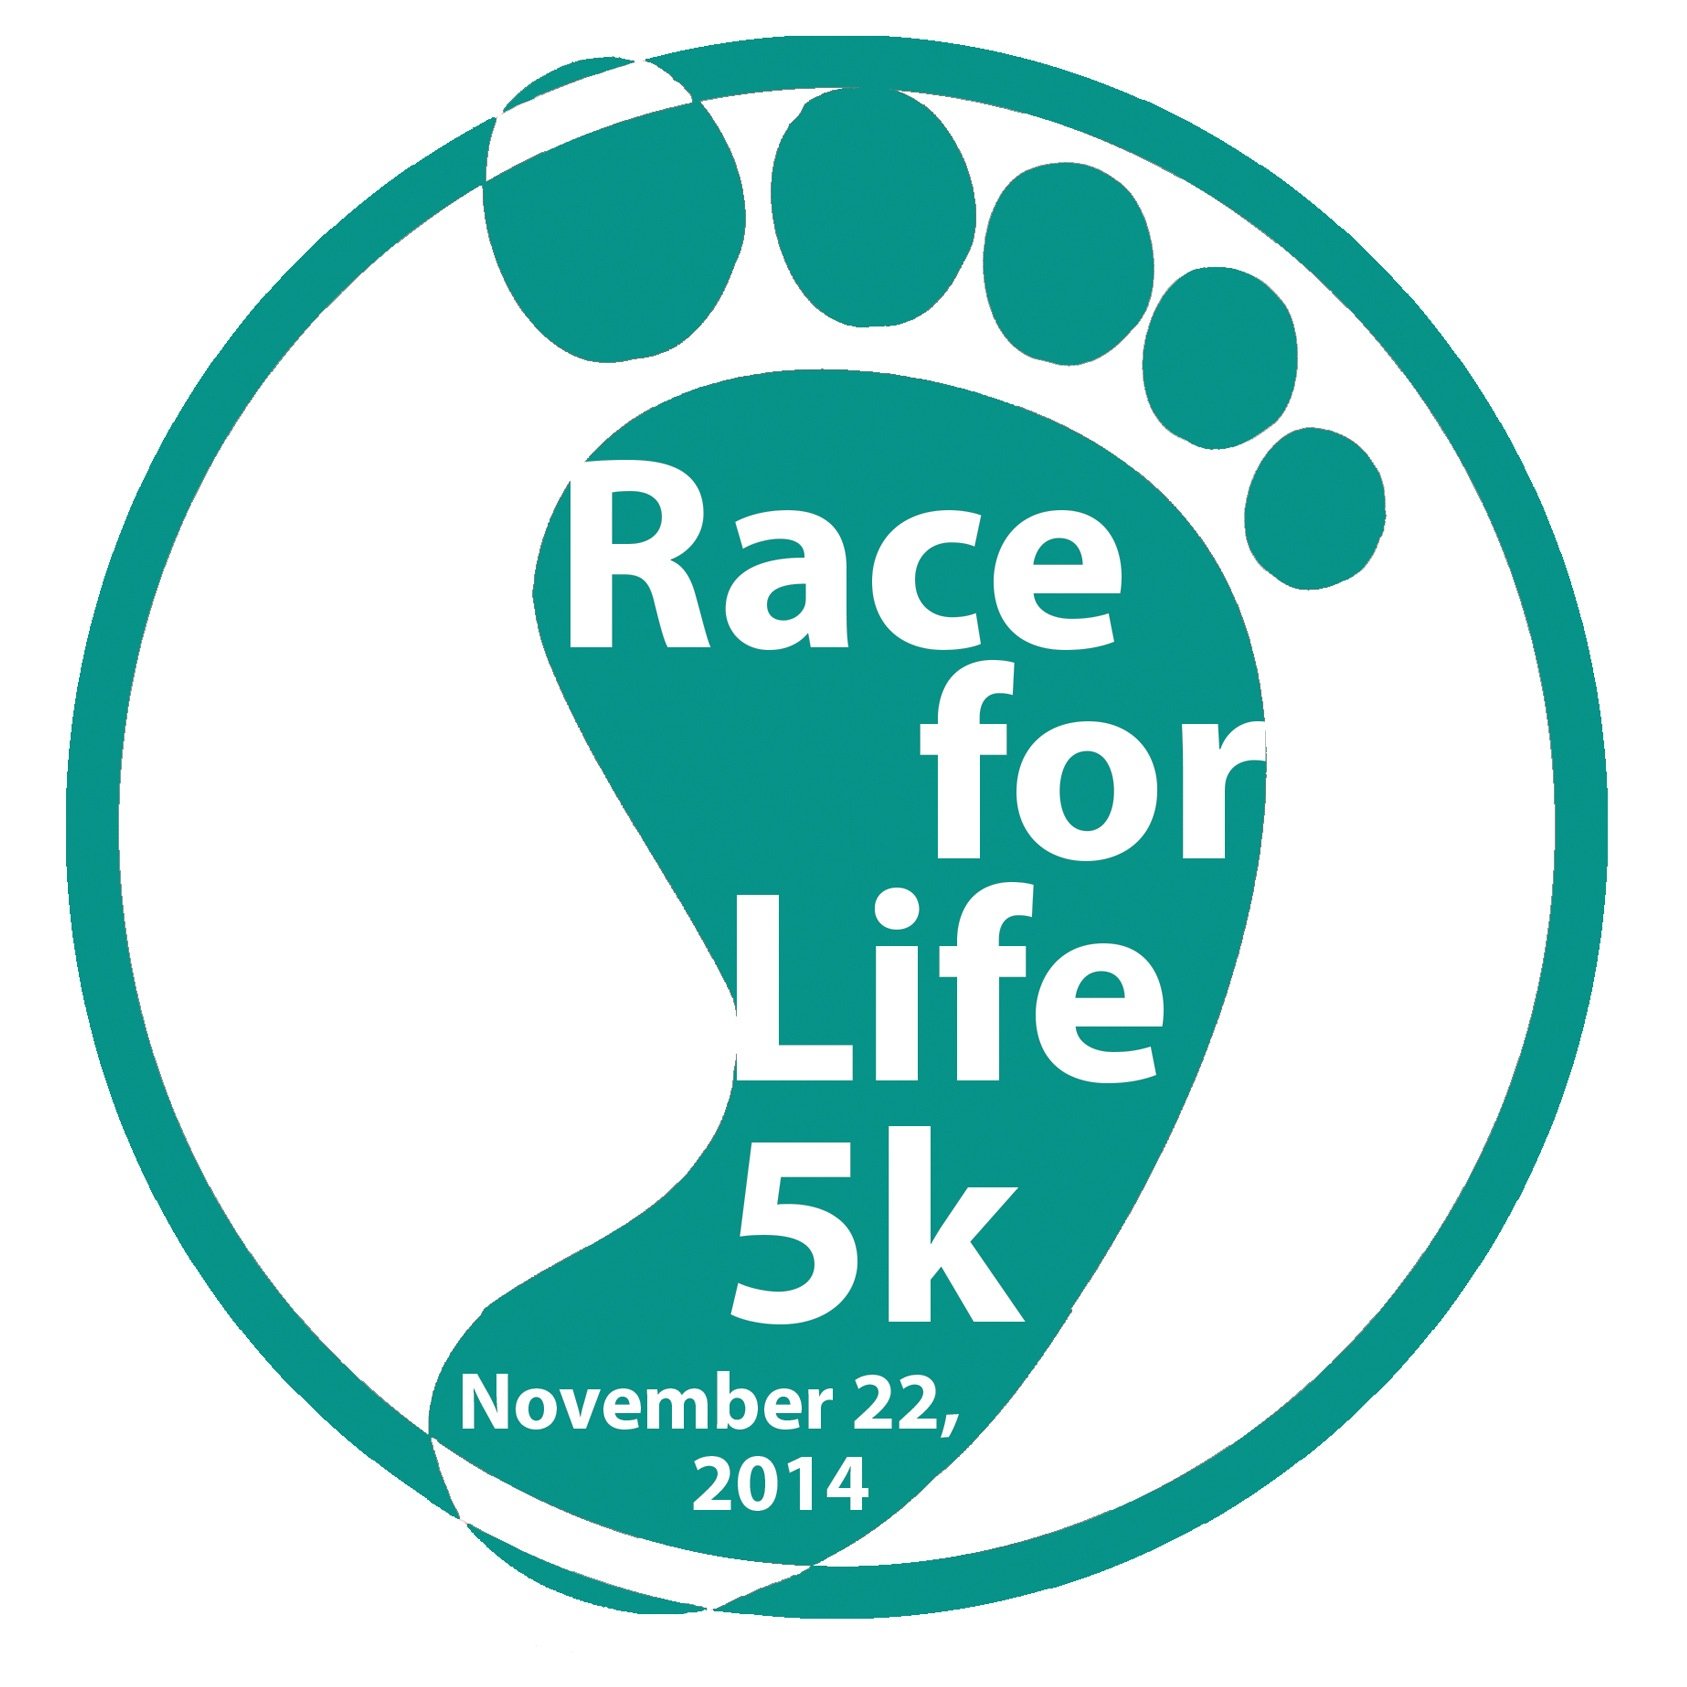 A 5K Run/Walk and Kid’s Fun Run. There will be prizes, costumes and a donations drive. Come out and join the fun. All proceeds benefit Life Line Pregnancy.